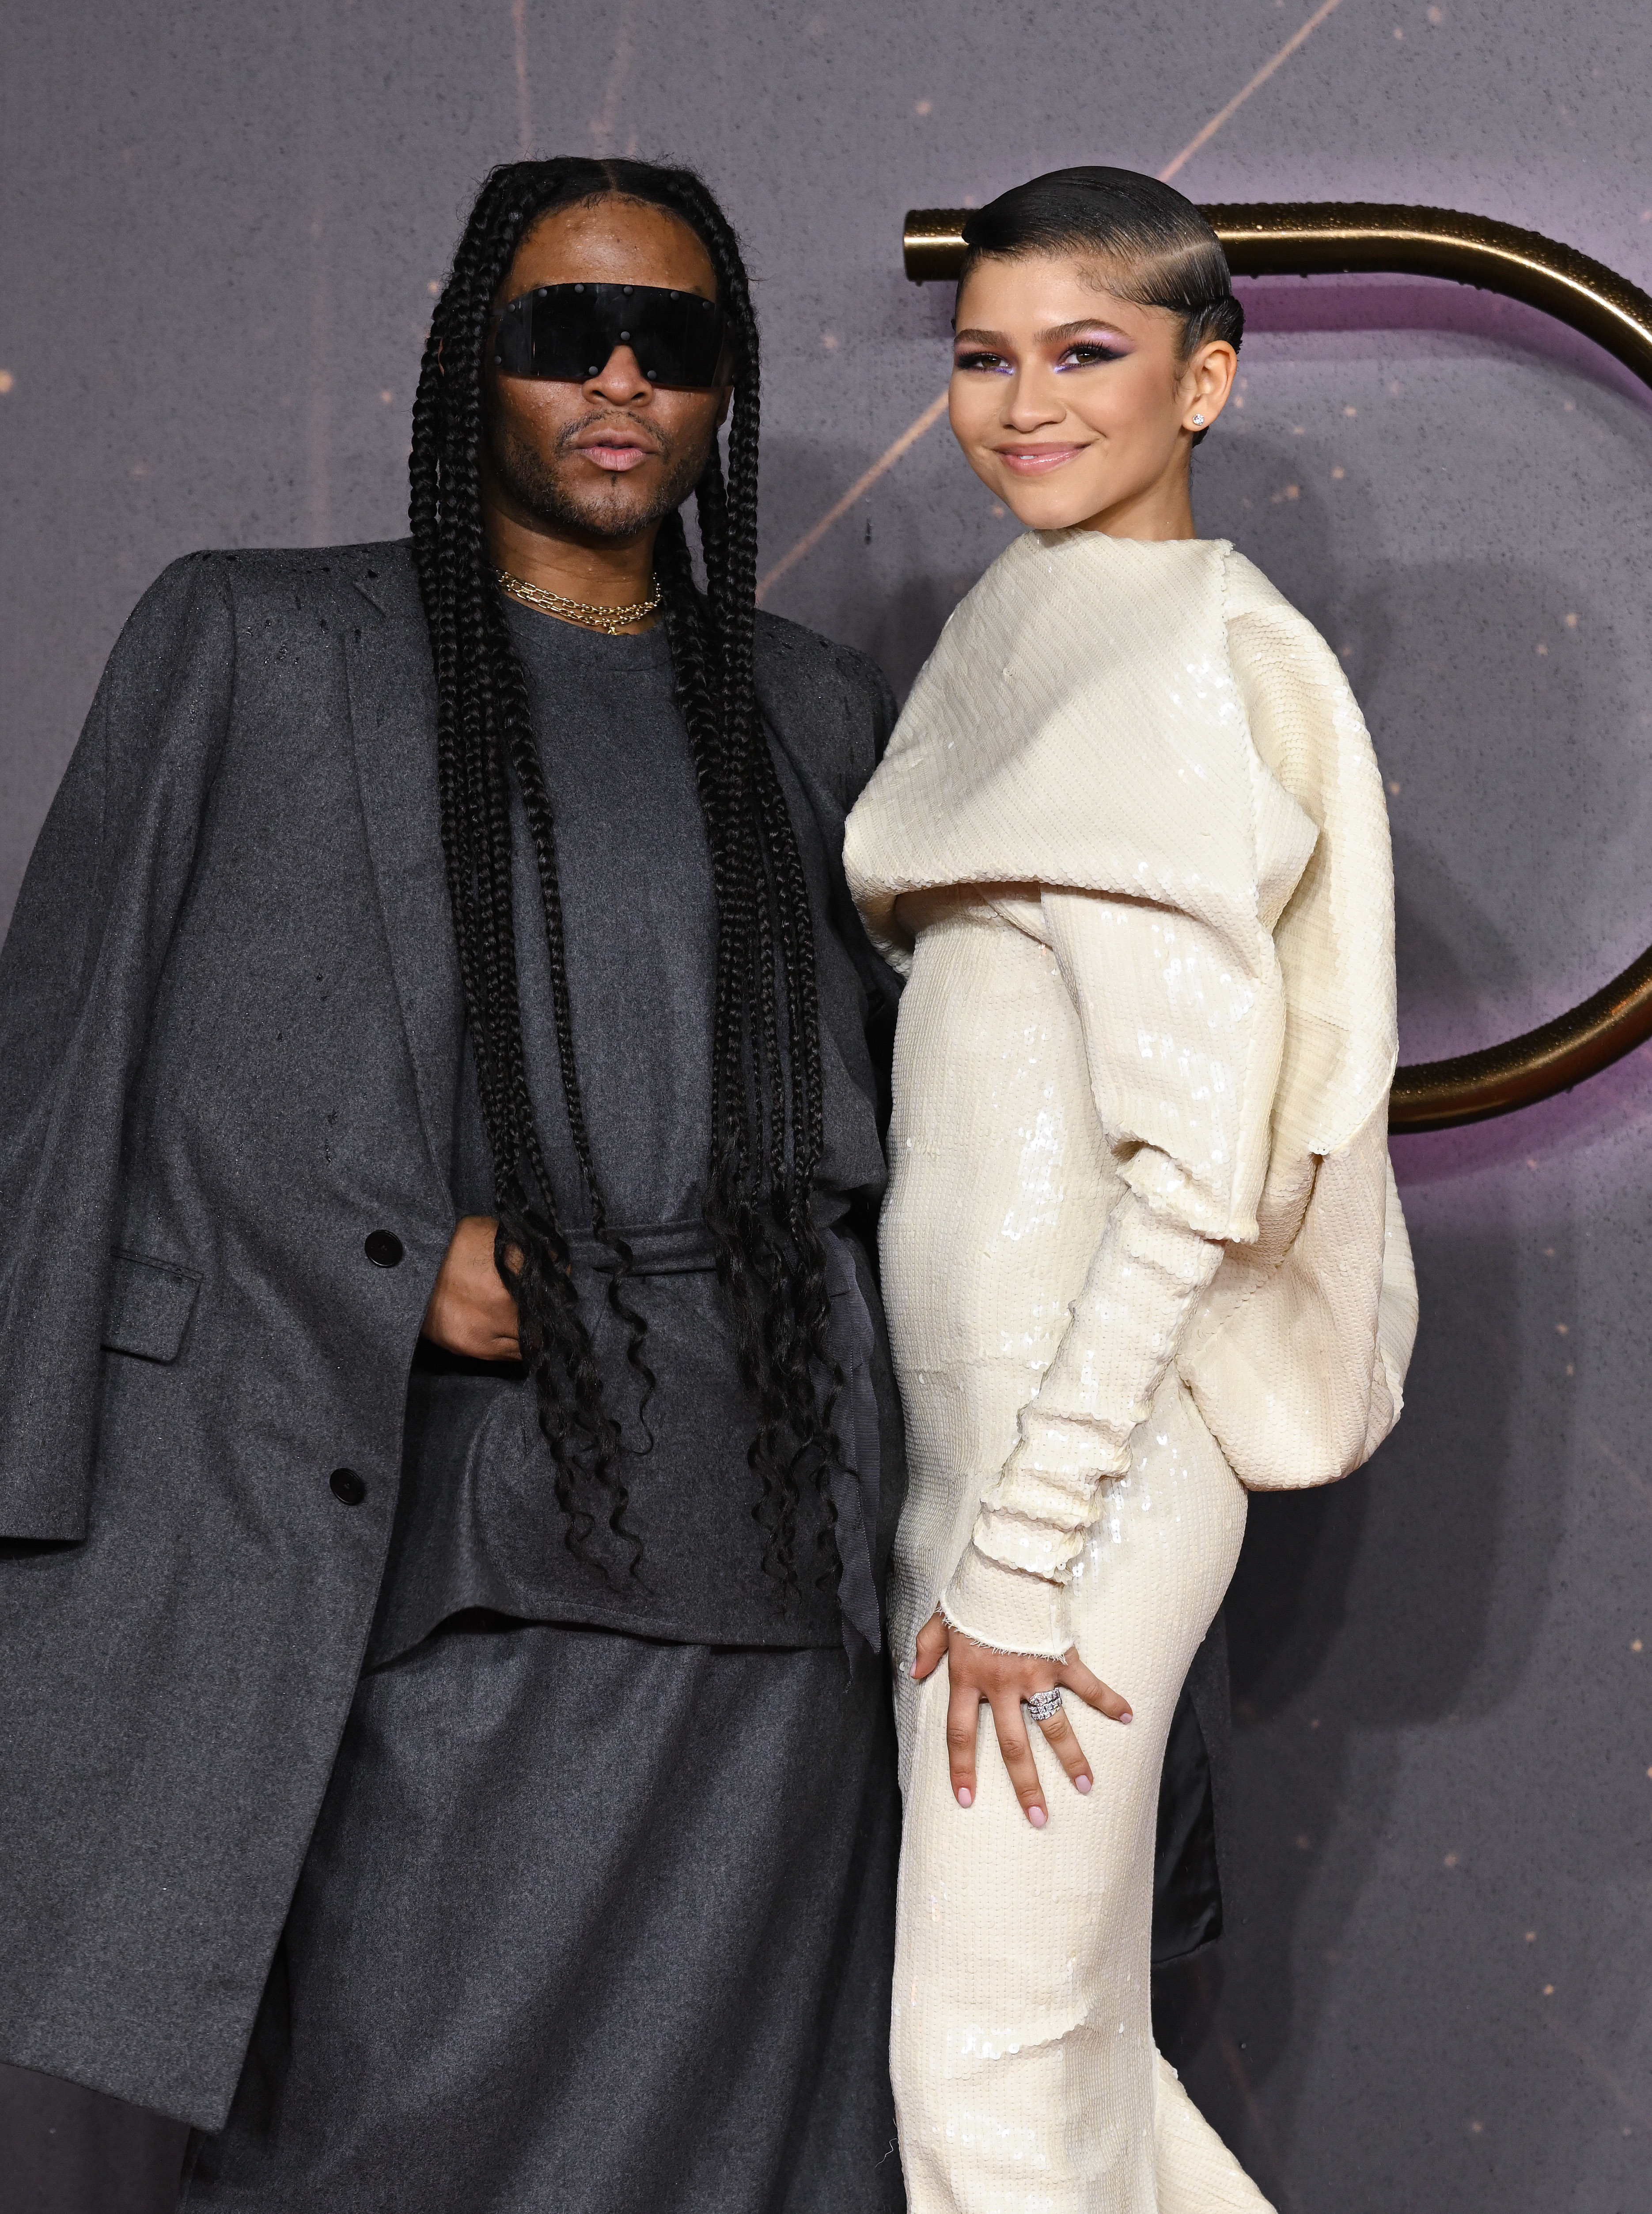 Close-up of Law and Zendaya at a media event